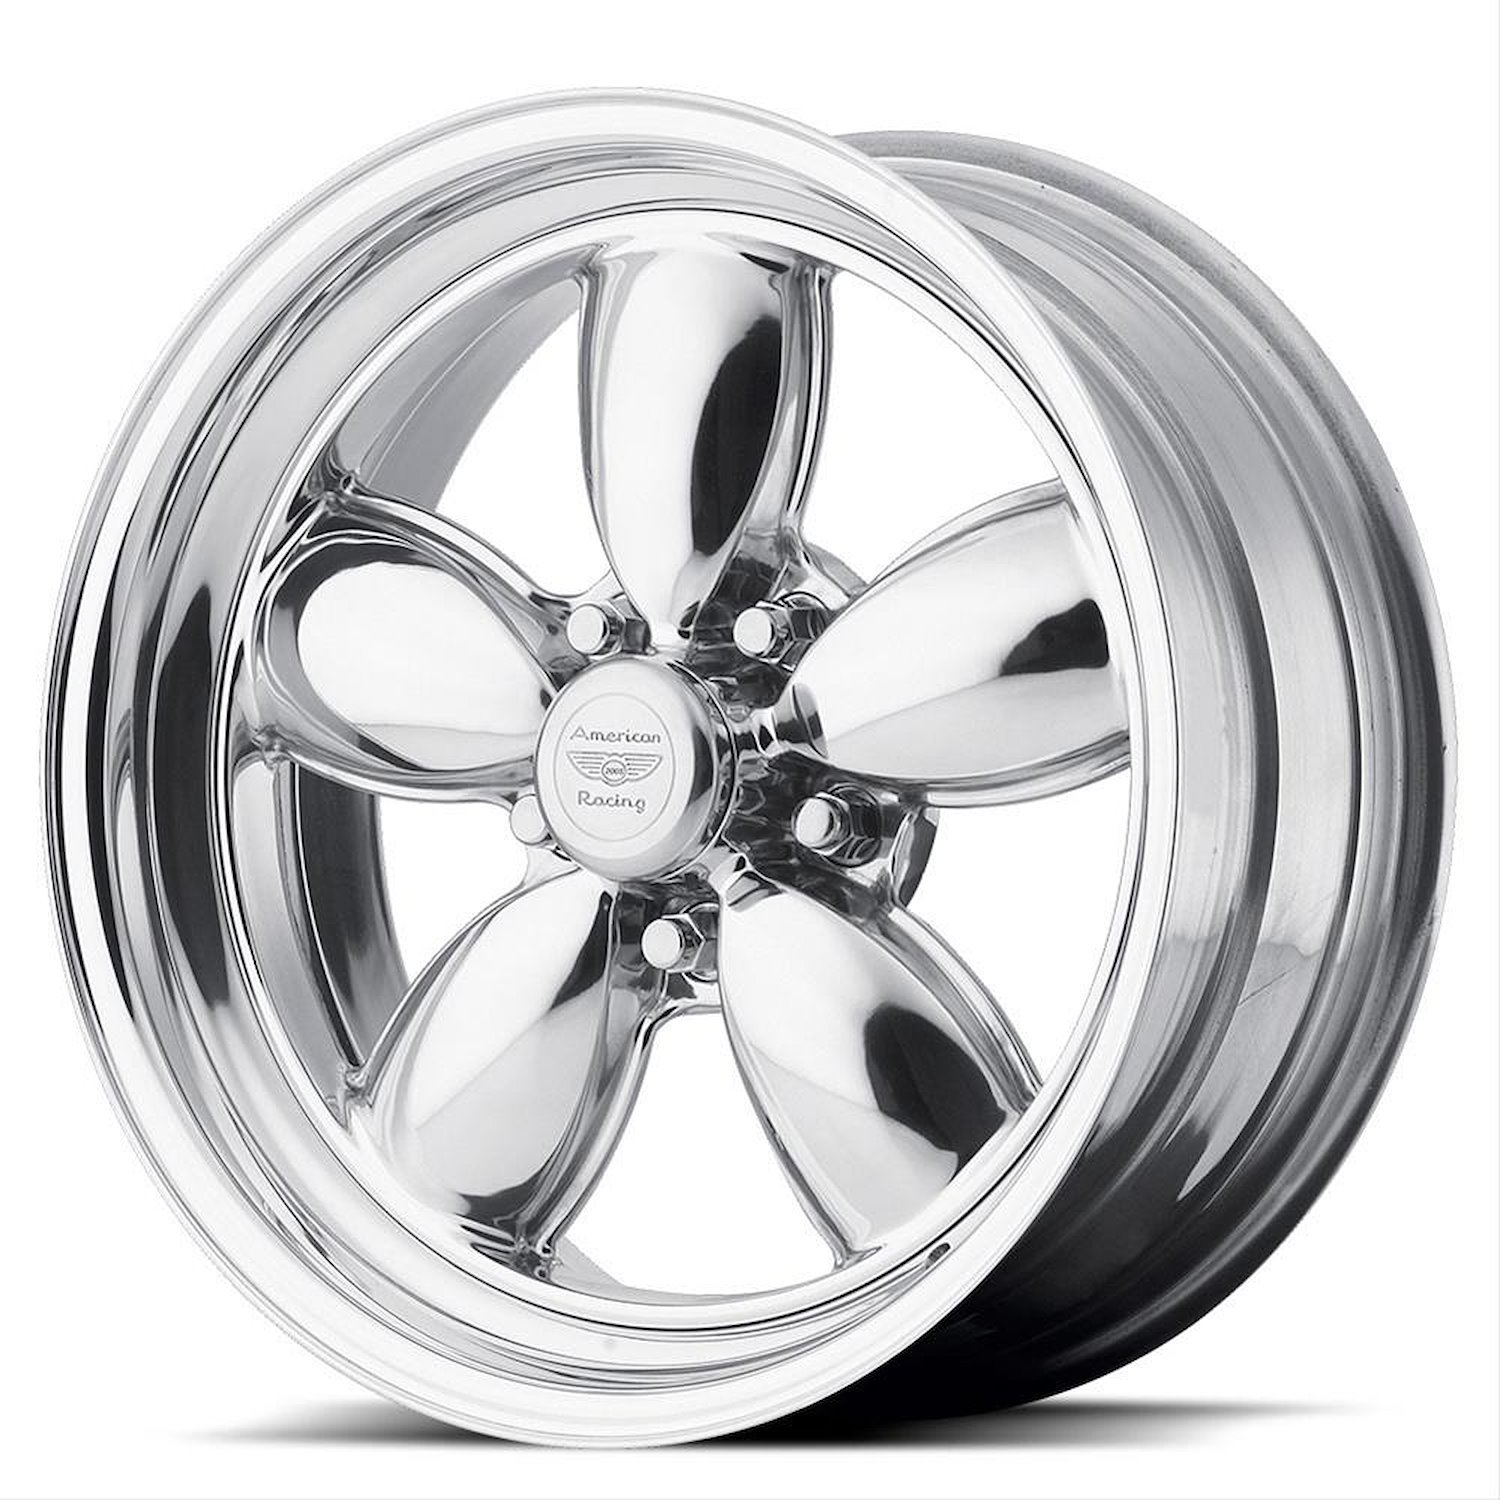 AMERICAN RACING CLASSIC 200S TWO-PIECE POLISHED 15 x 6 5x4.5 -13 2.99